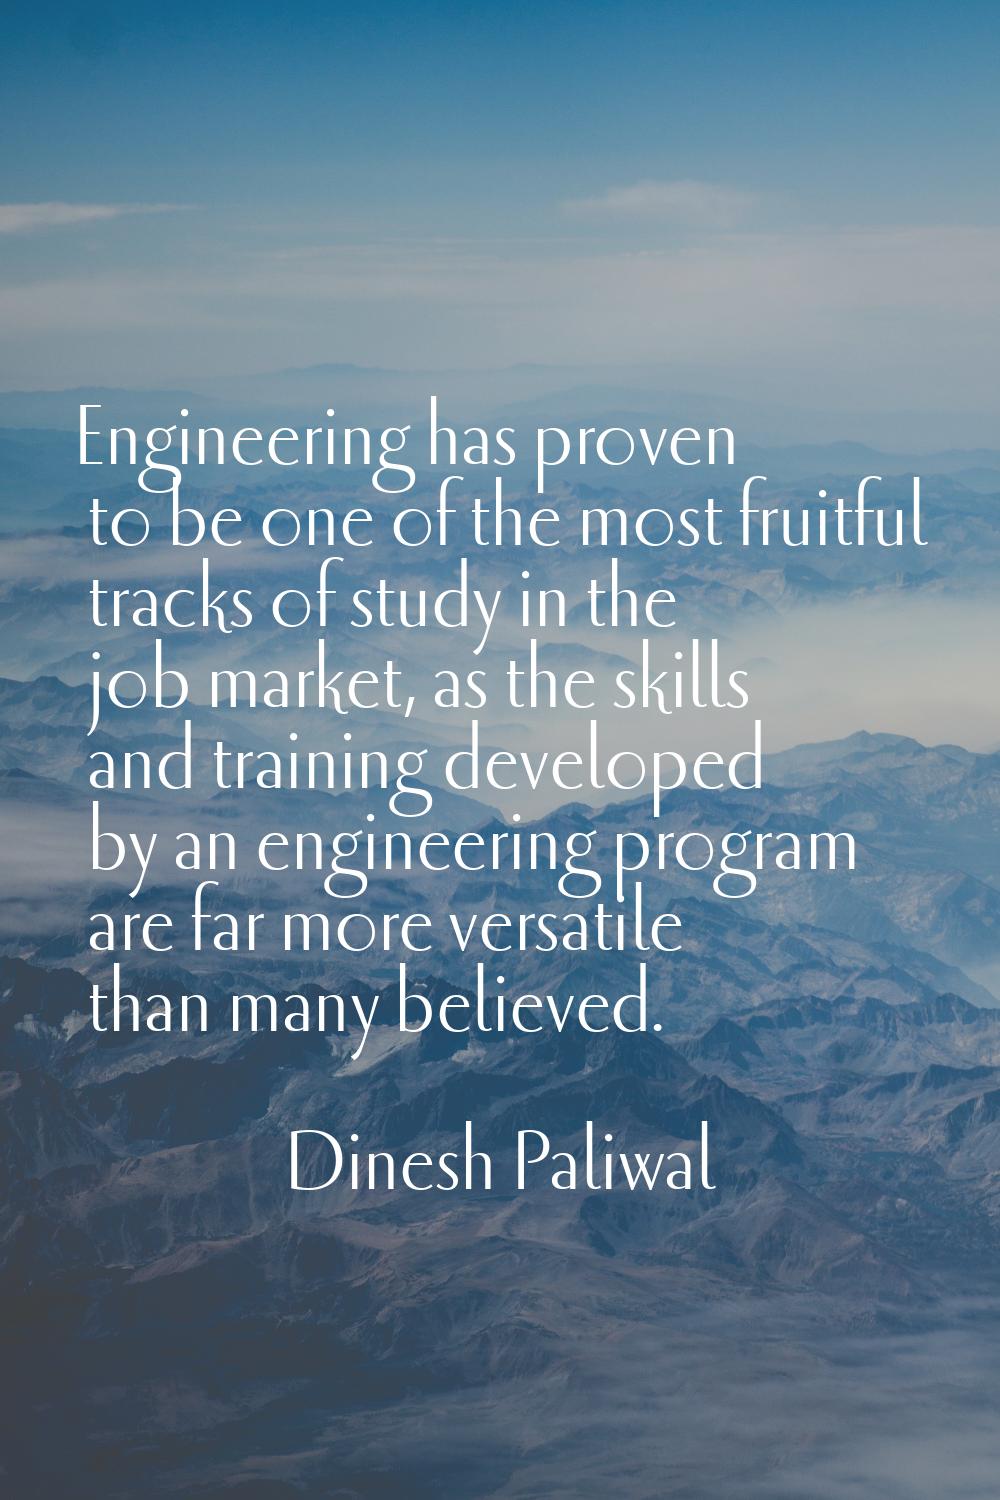 Engineering has proven to be one of the most fruitful tracks of study in the job market, as the ski